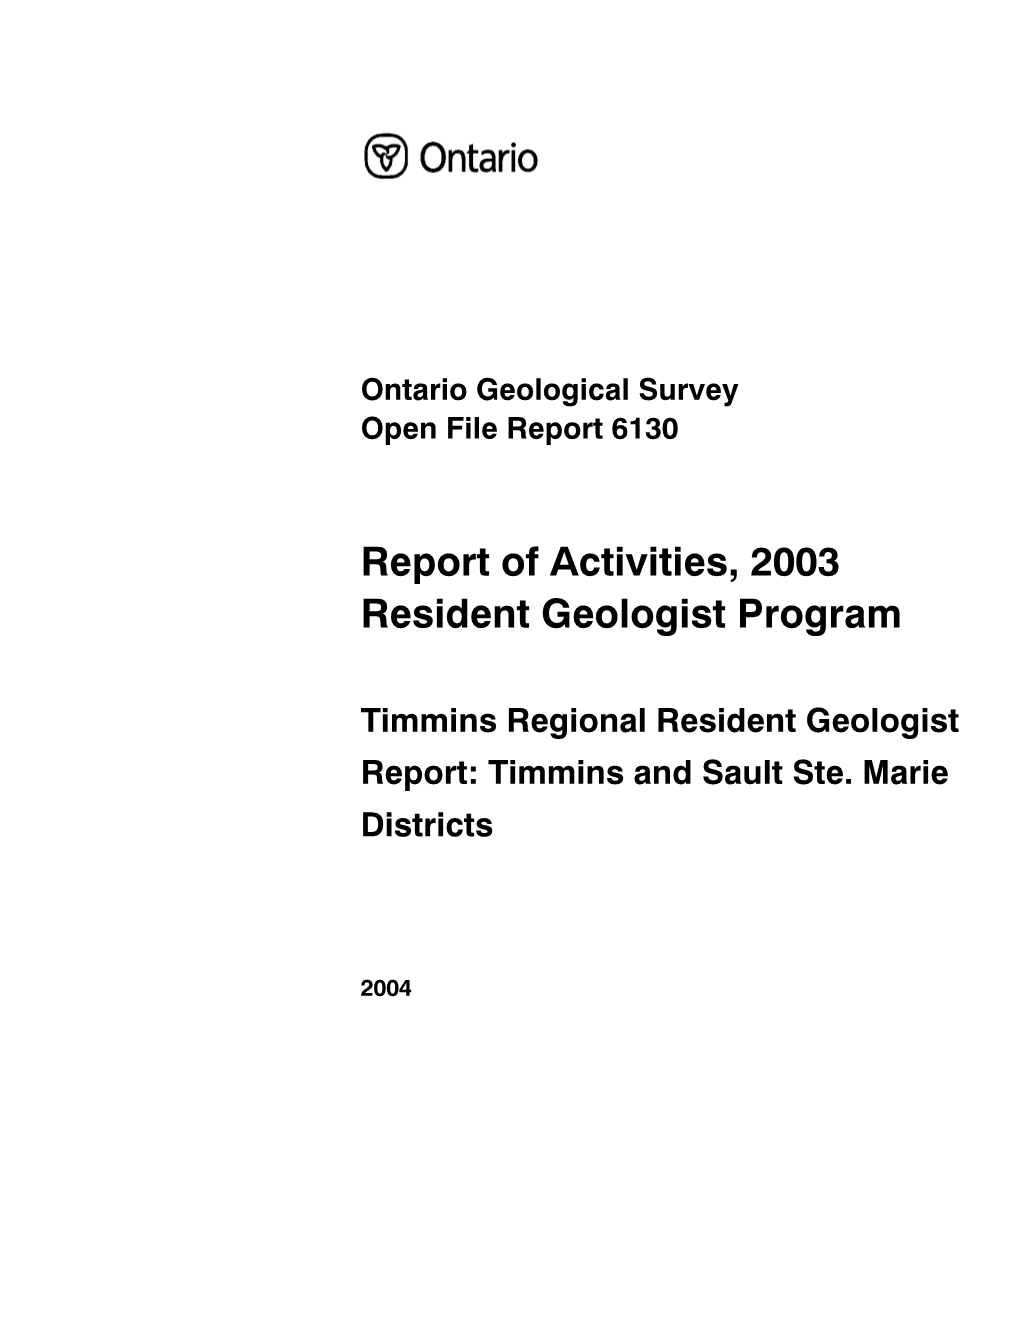 Report Activities Resident Timmins 2003